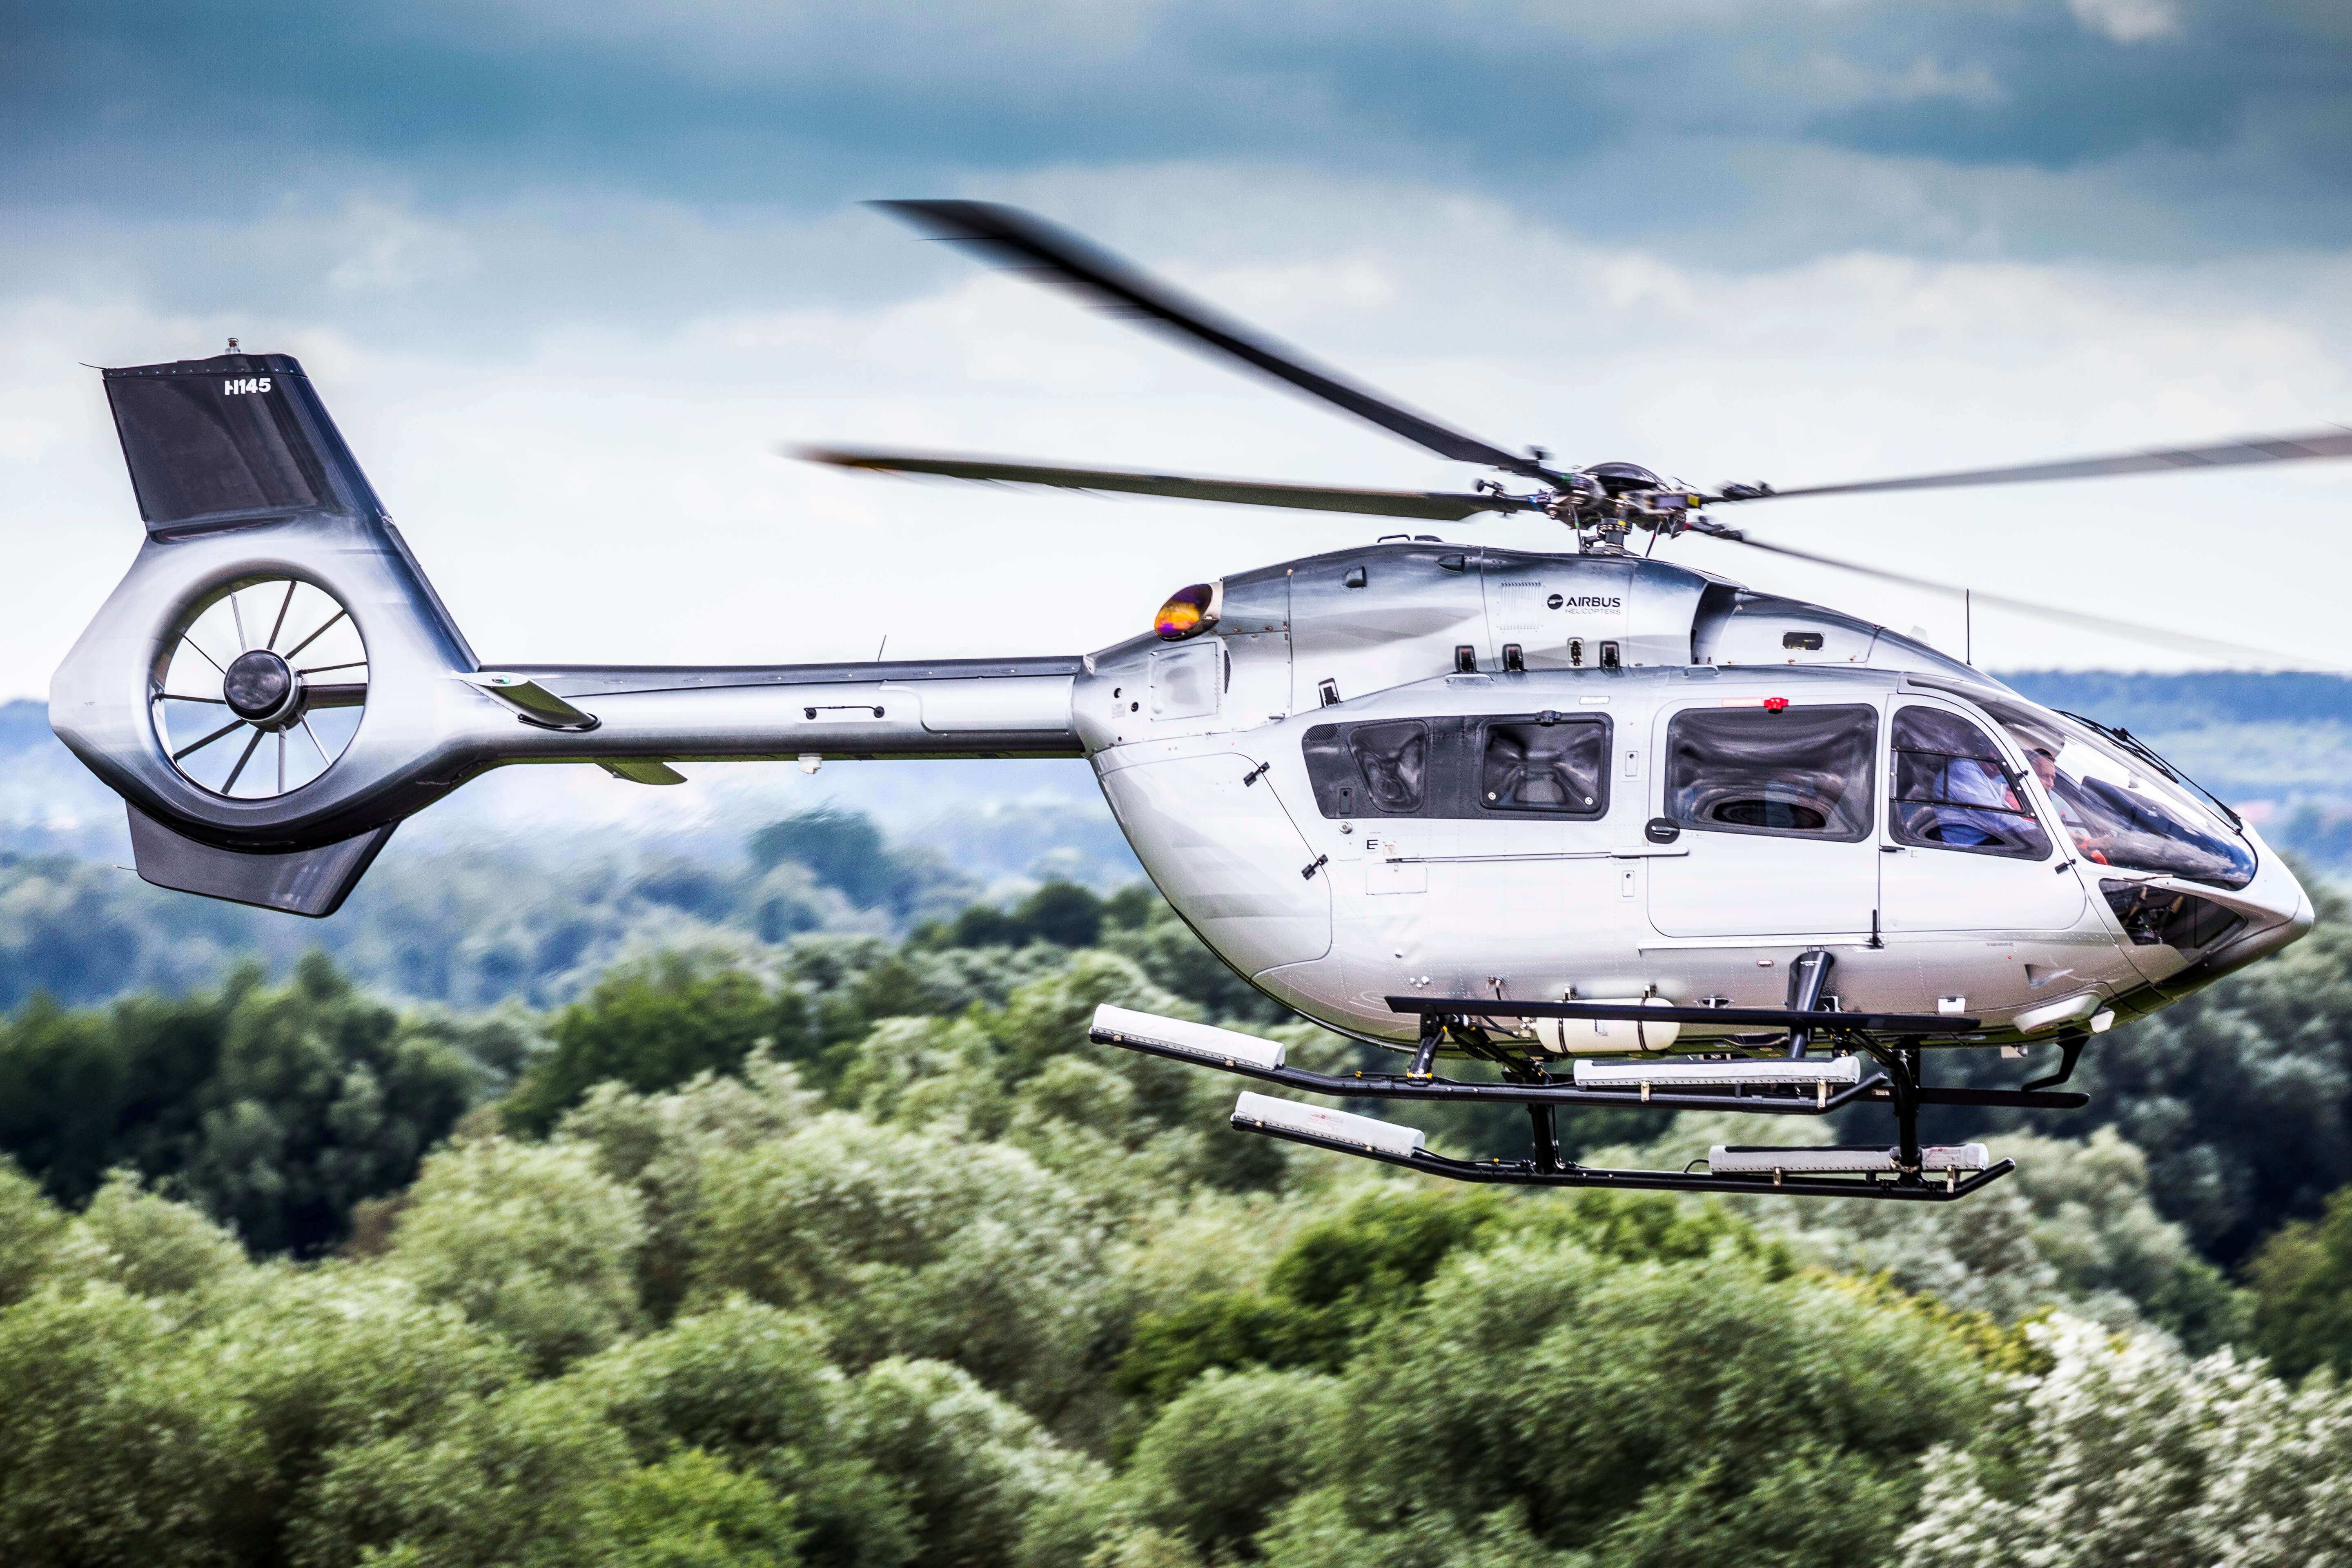 The new H145 MB helicopter from Airbus.